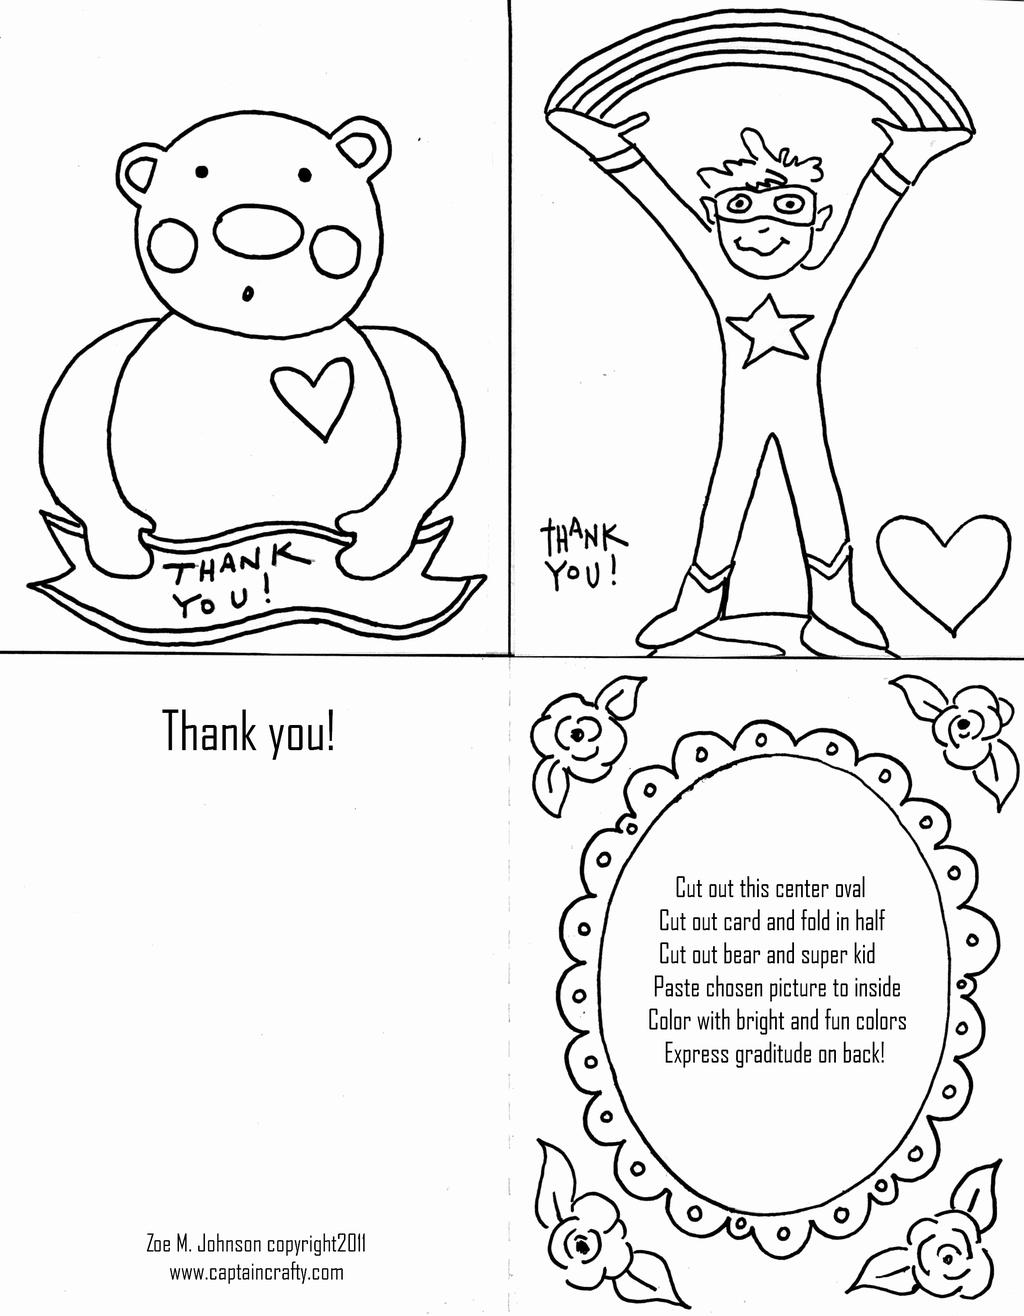 Free Thank You For Your Service Coloring Pages Card with Animals printable